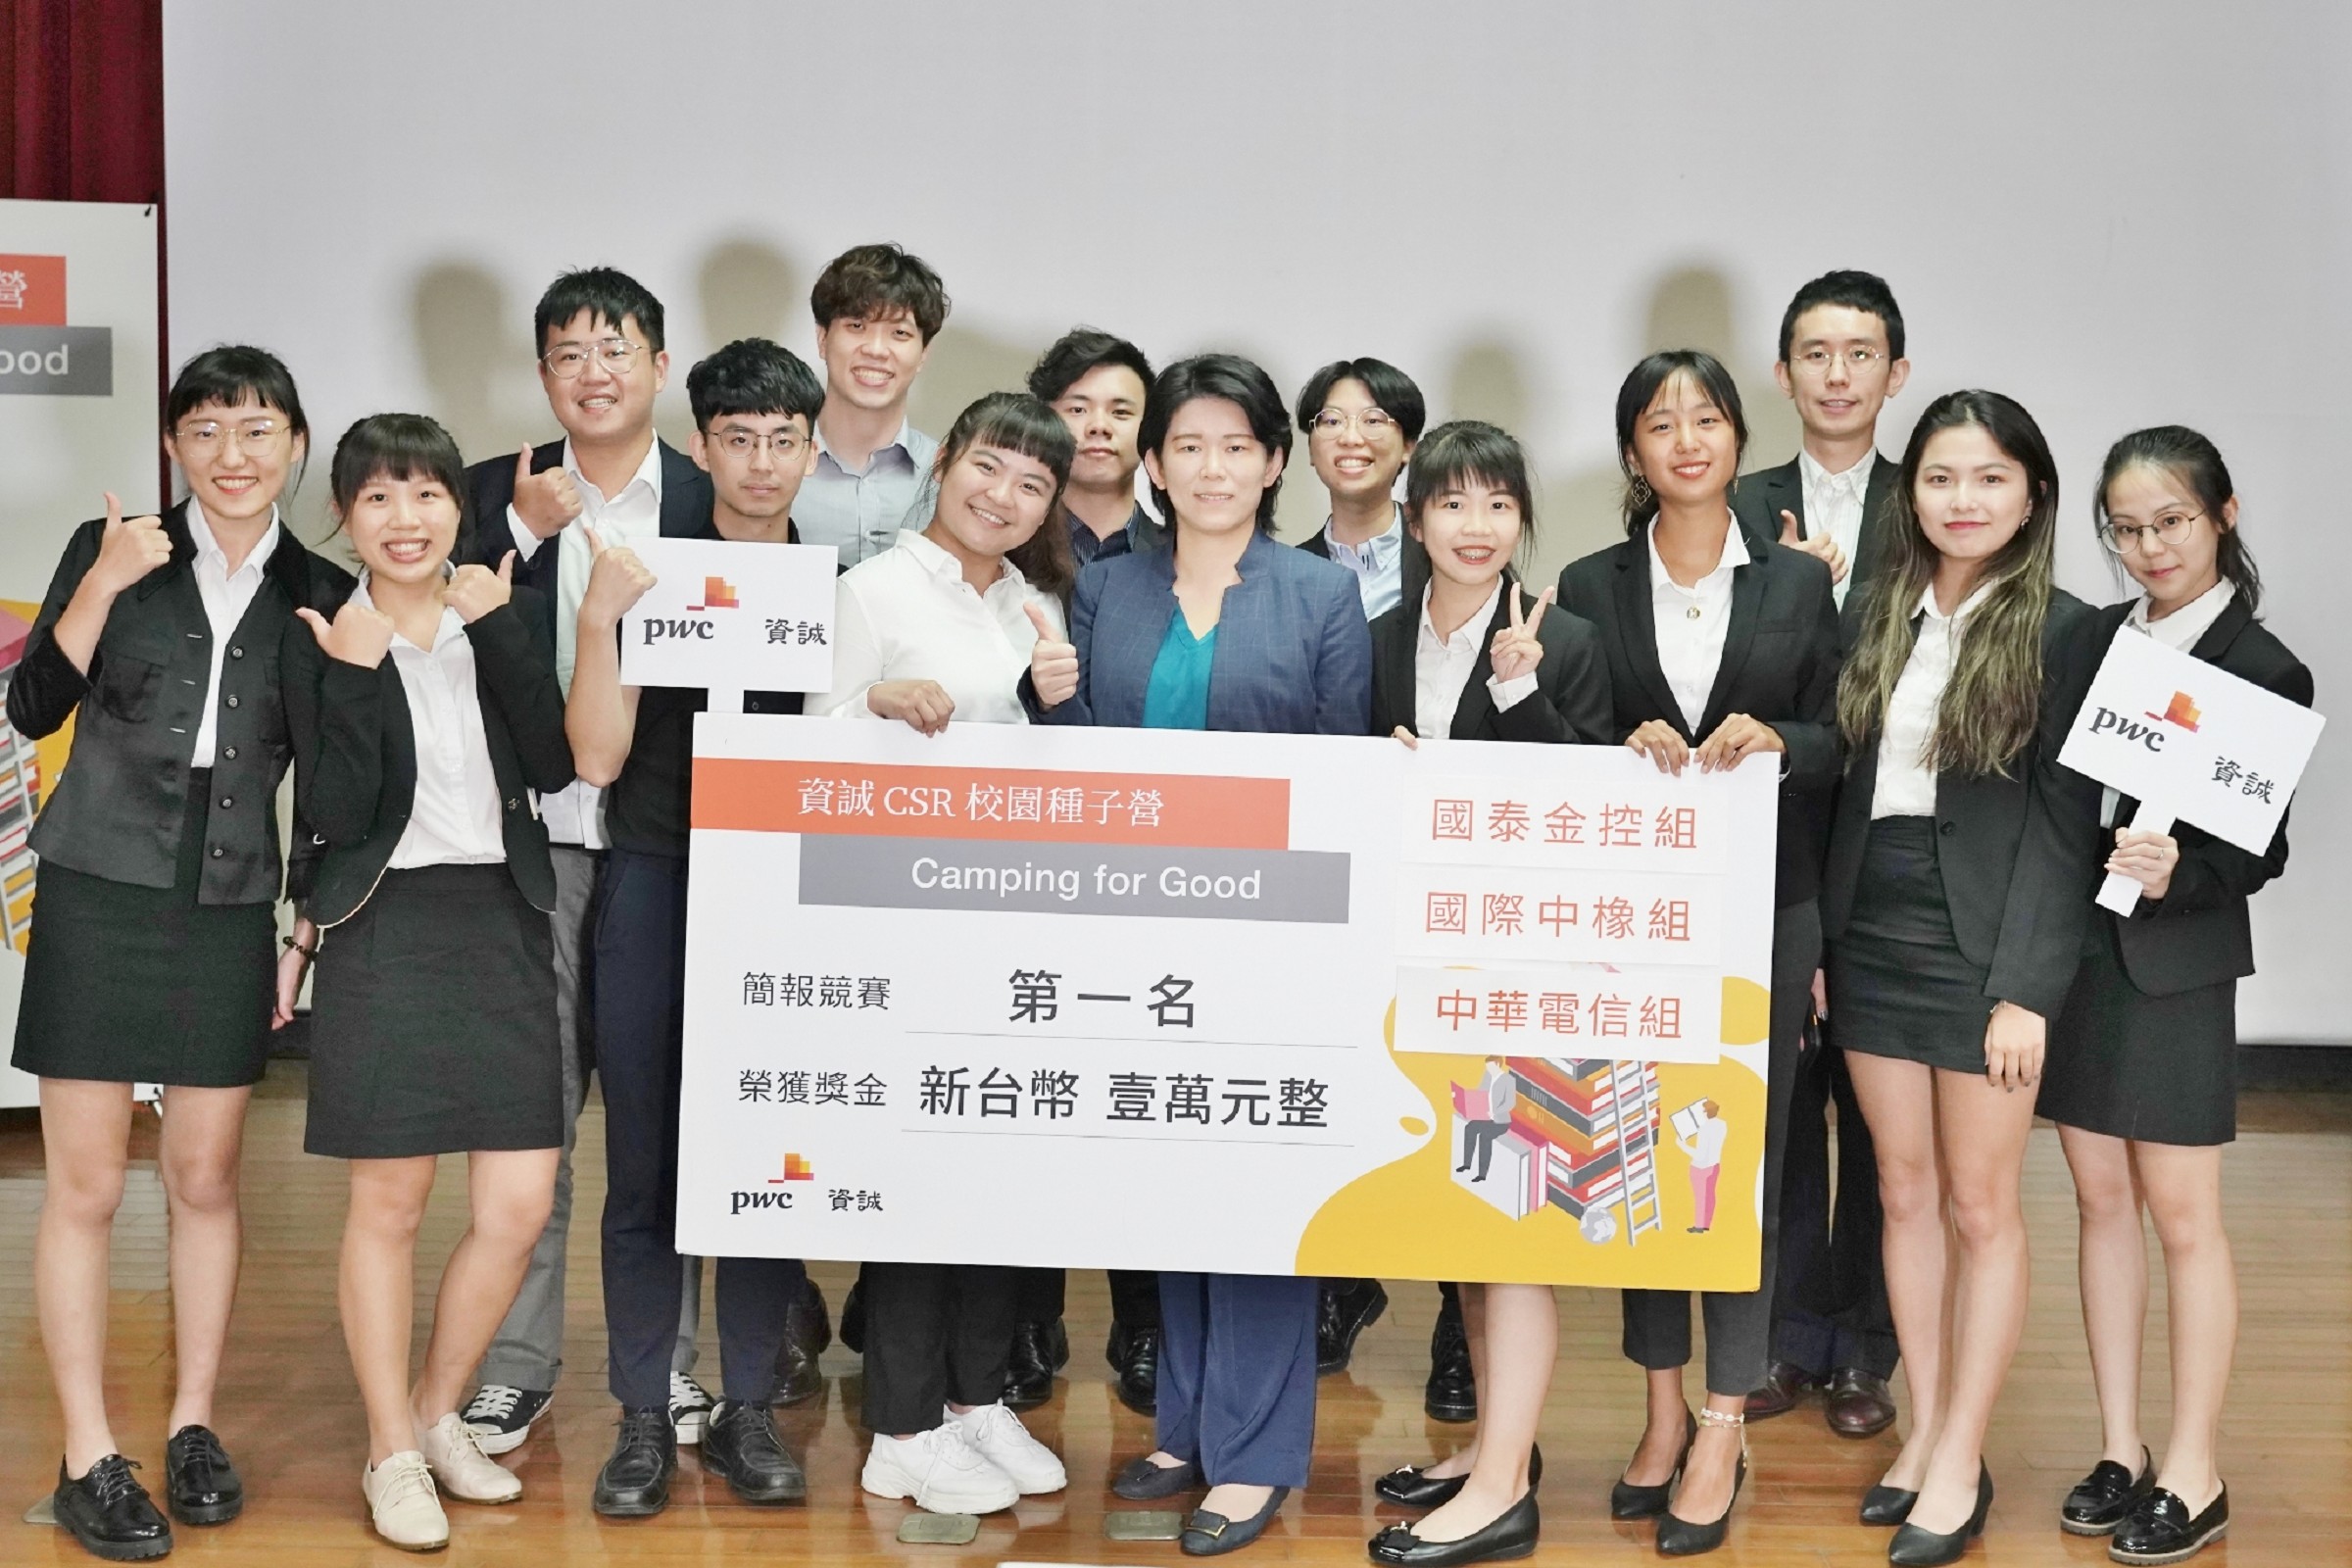 NSYSU students’ teams win 3 prizes for CSR proposals during the 8th PwC Taiwan Camping for Good